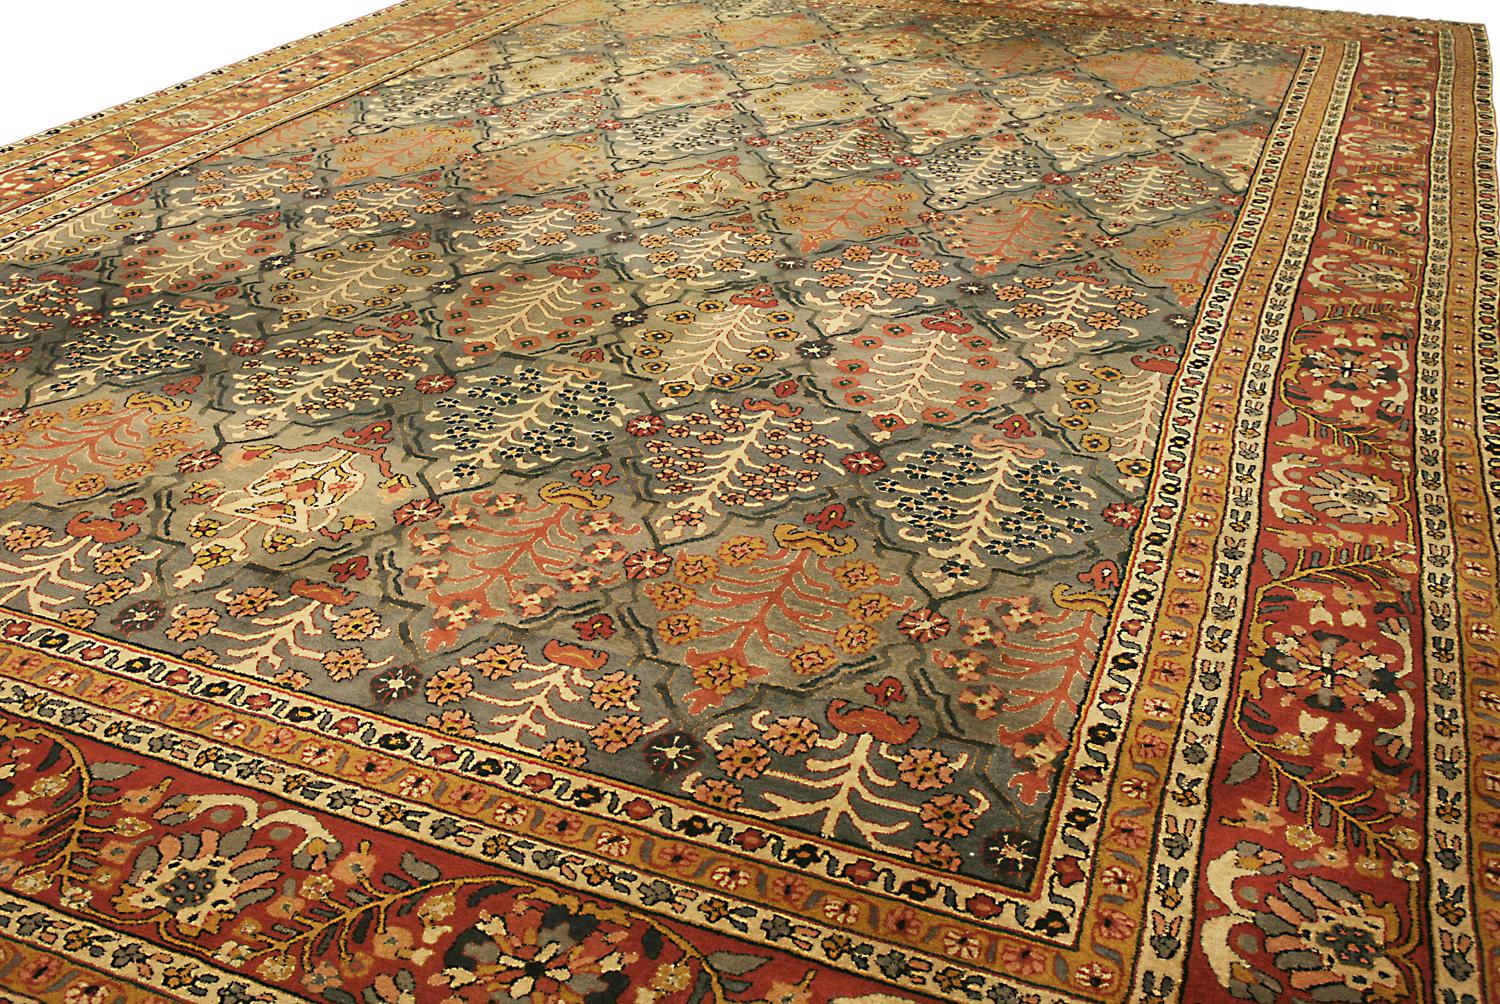 This is a semi-antique German Tetex rug woven during the second quarter of the 20th century circa 1940 and measures 485x 336 CM in size. This piece has an allover design comprised of alternating rows of shrub motifs standing in the way enclosed